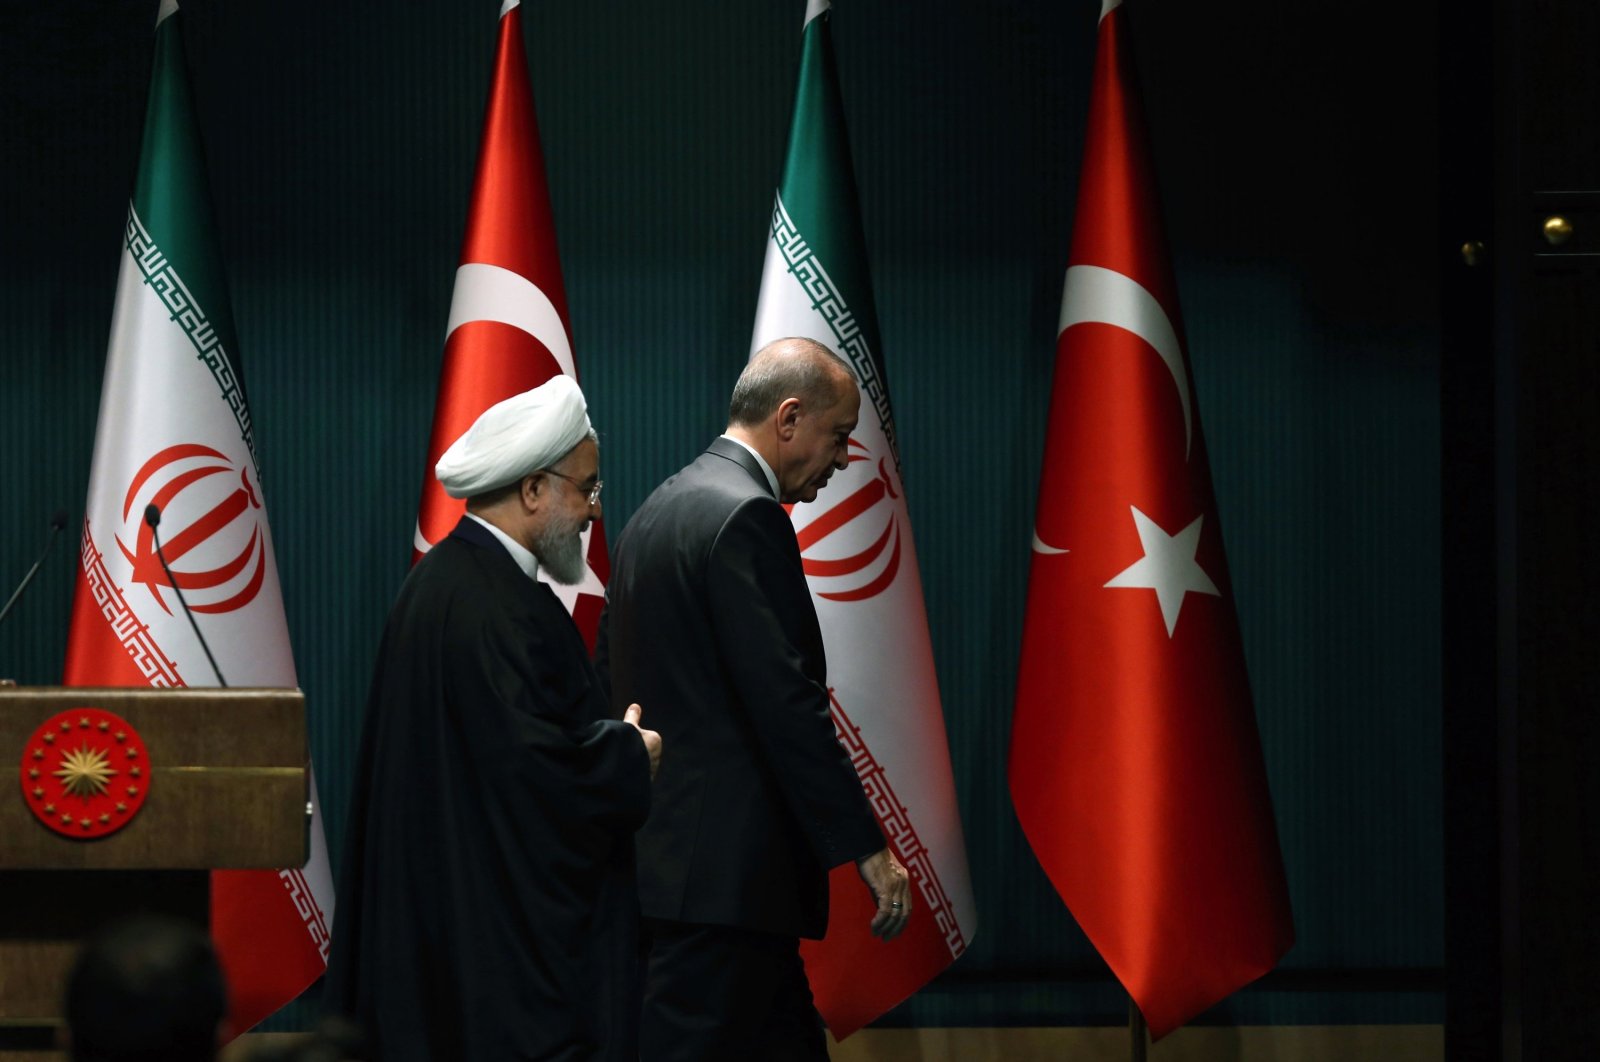 Iranian President Hassan Rouhanı (L) and President Recep Tayyip Erdoğan and leave after a joint press conference in the capital Ankara, Turkey, Dec. 20, 2018. (Sabah File Photo)